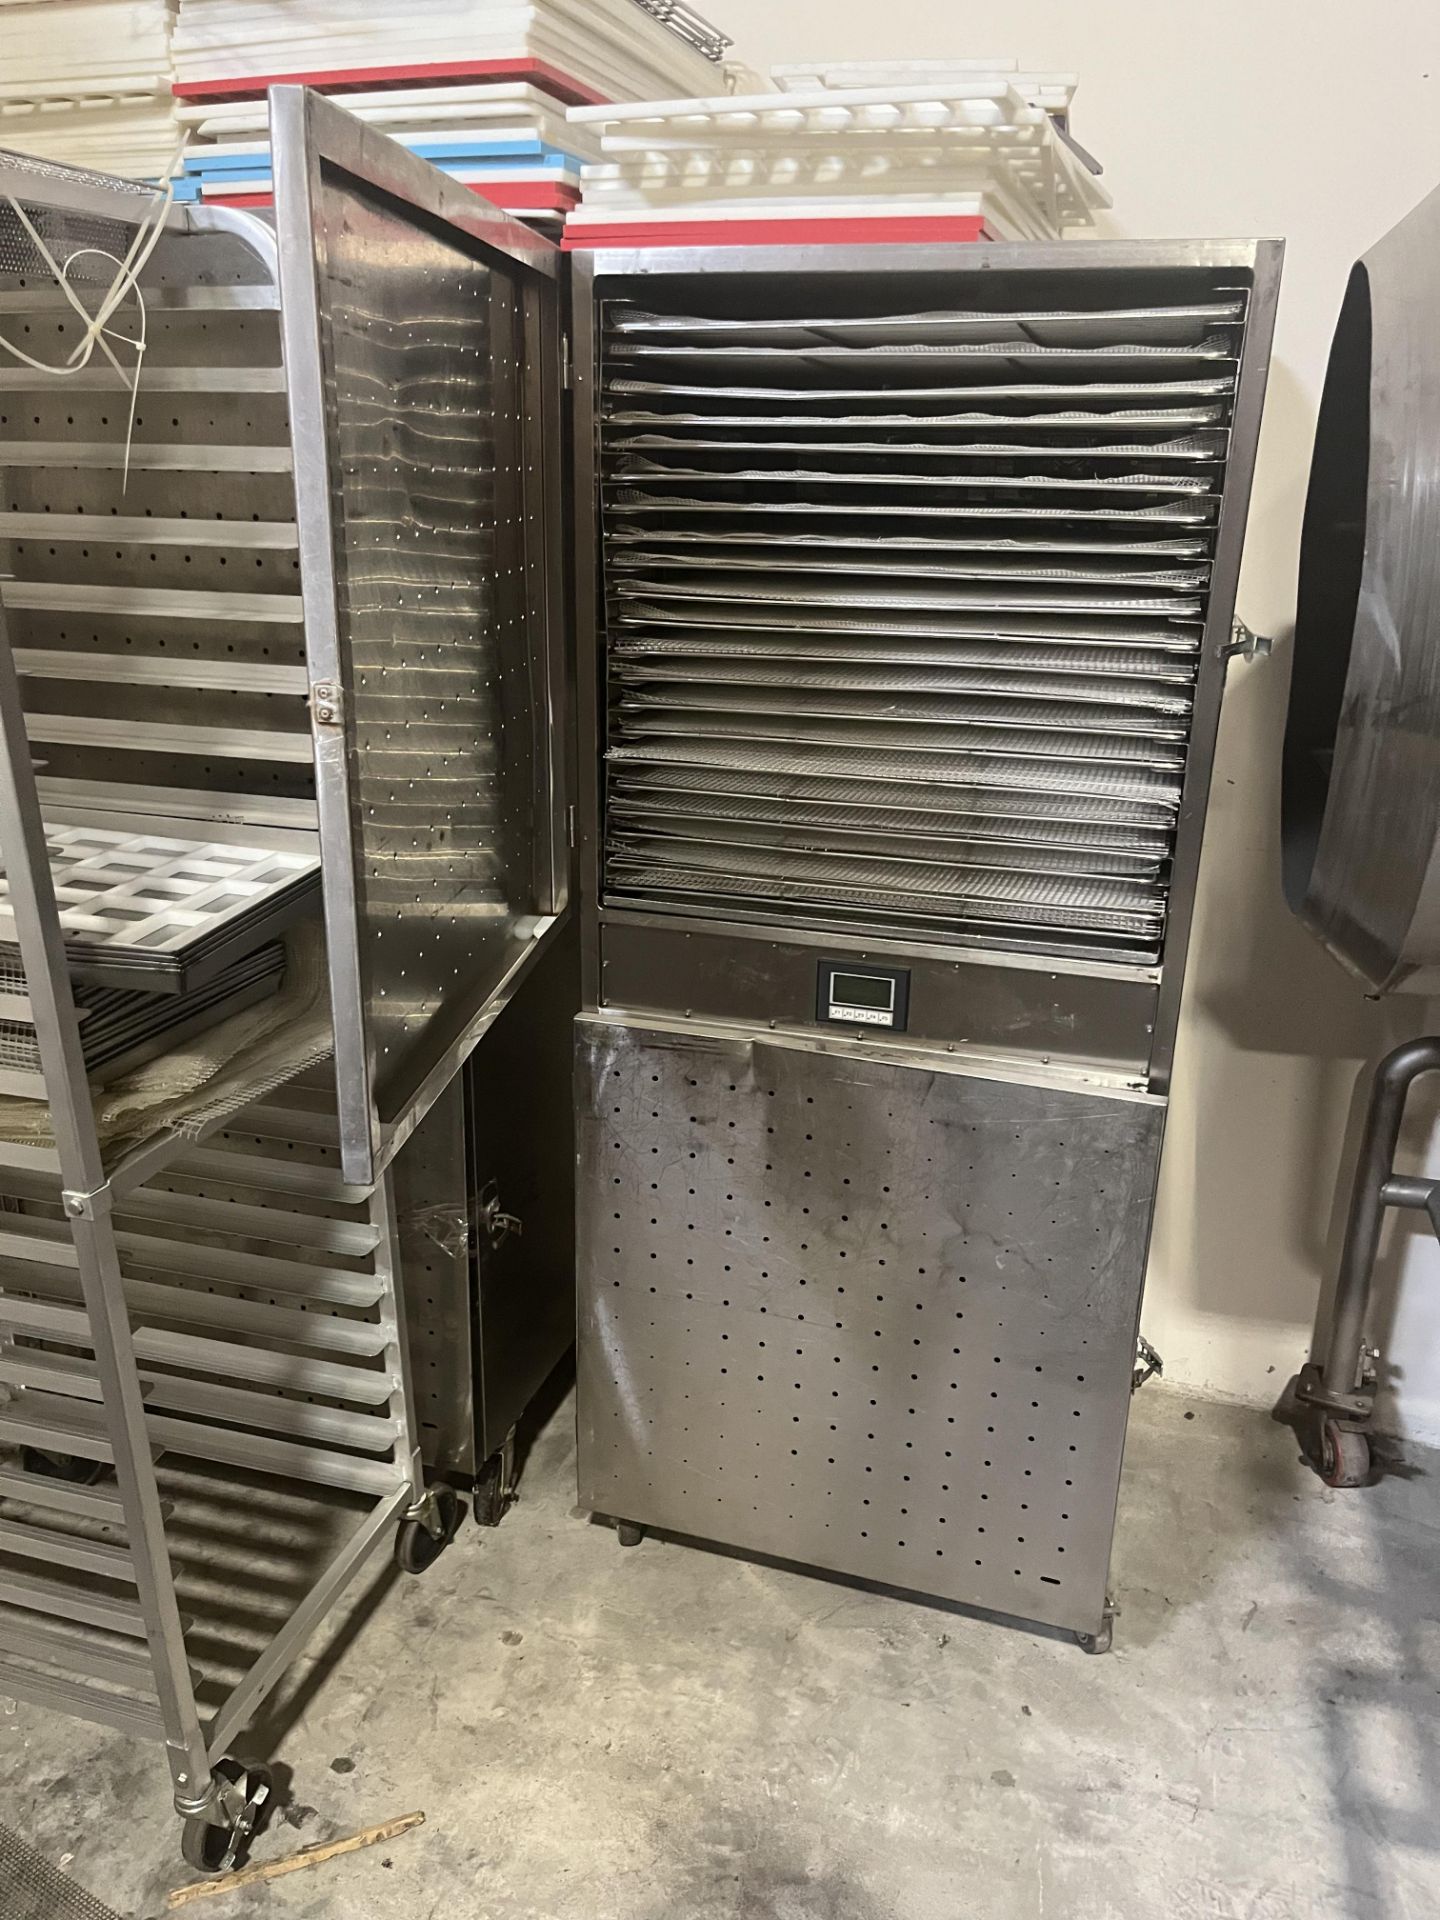 Stainless Steel Dehydrator - Image 2 of 4